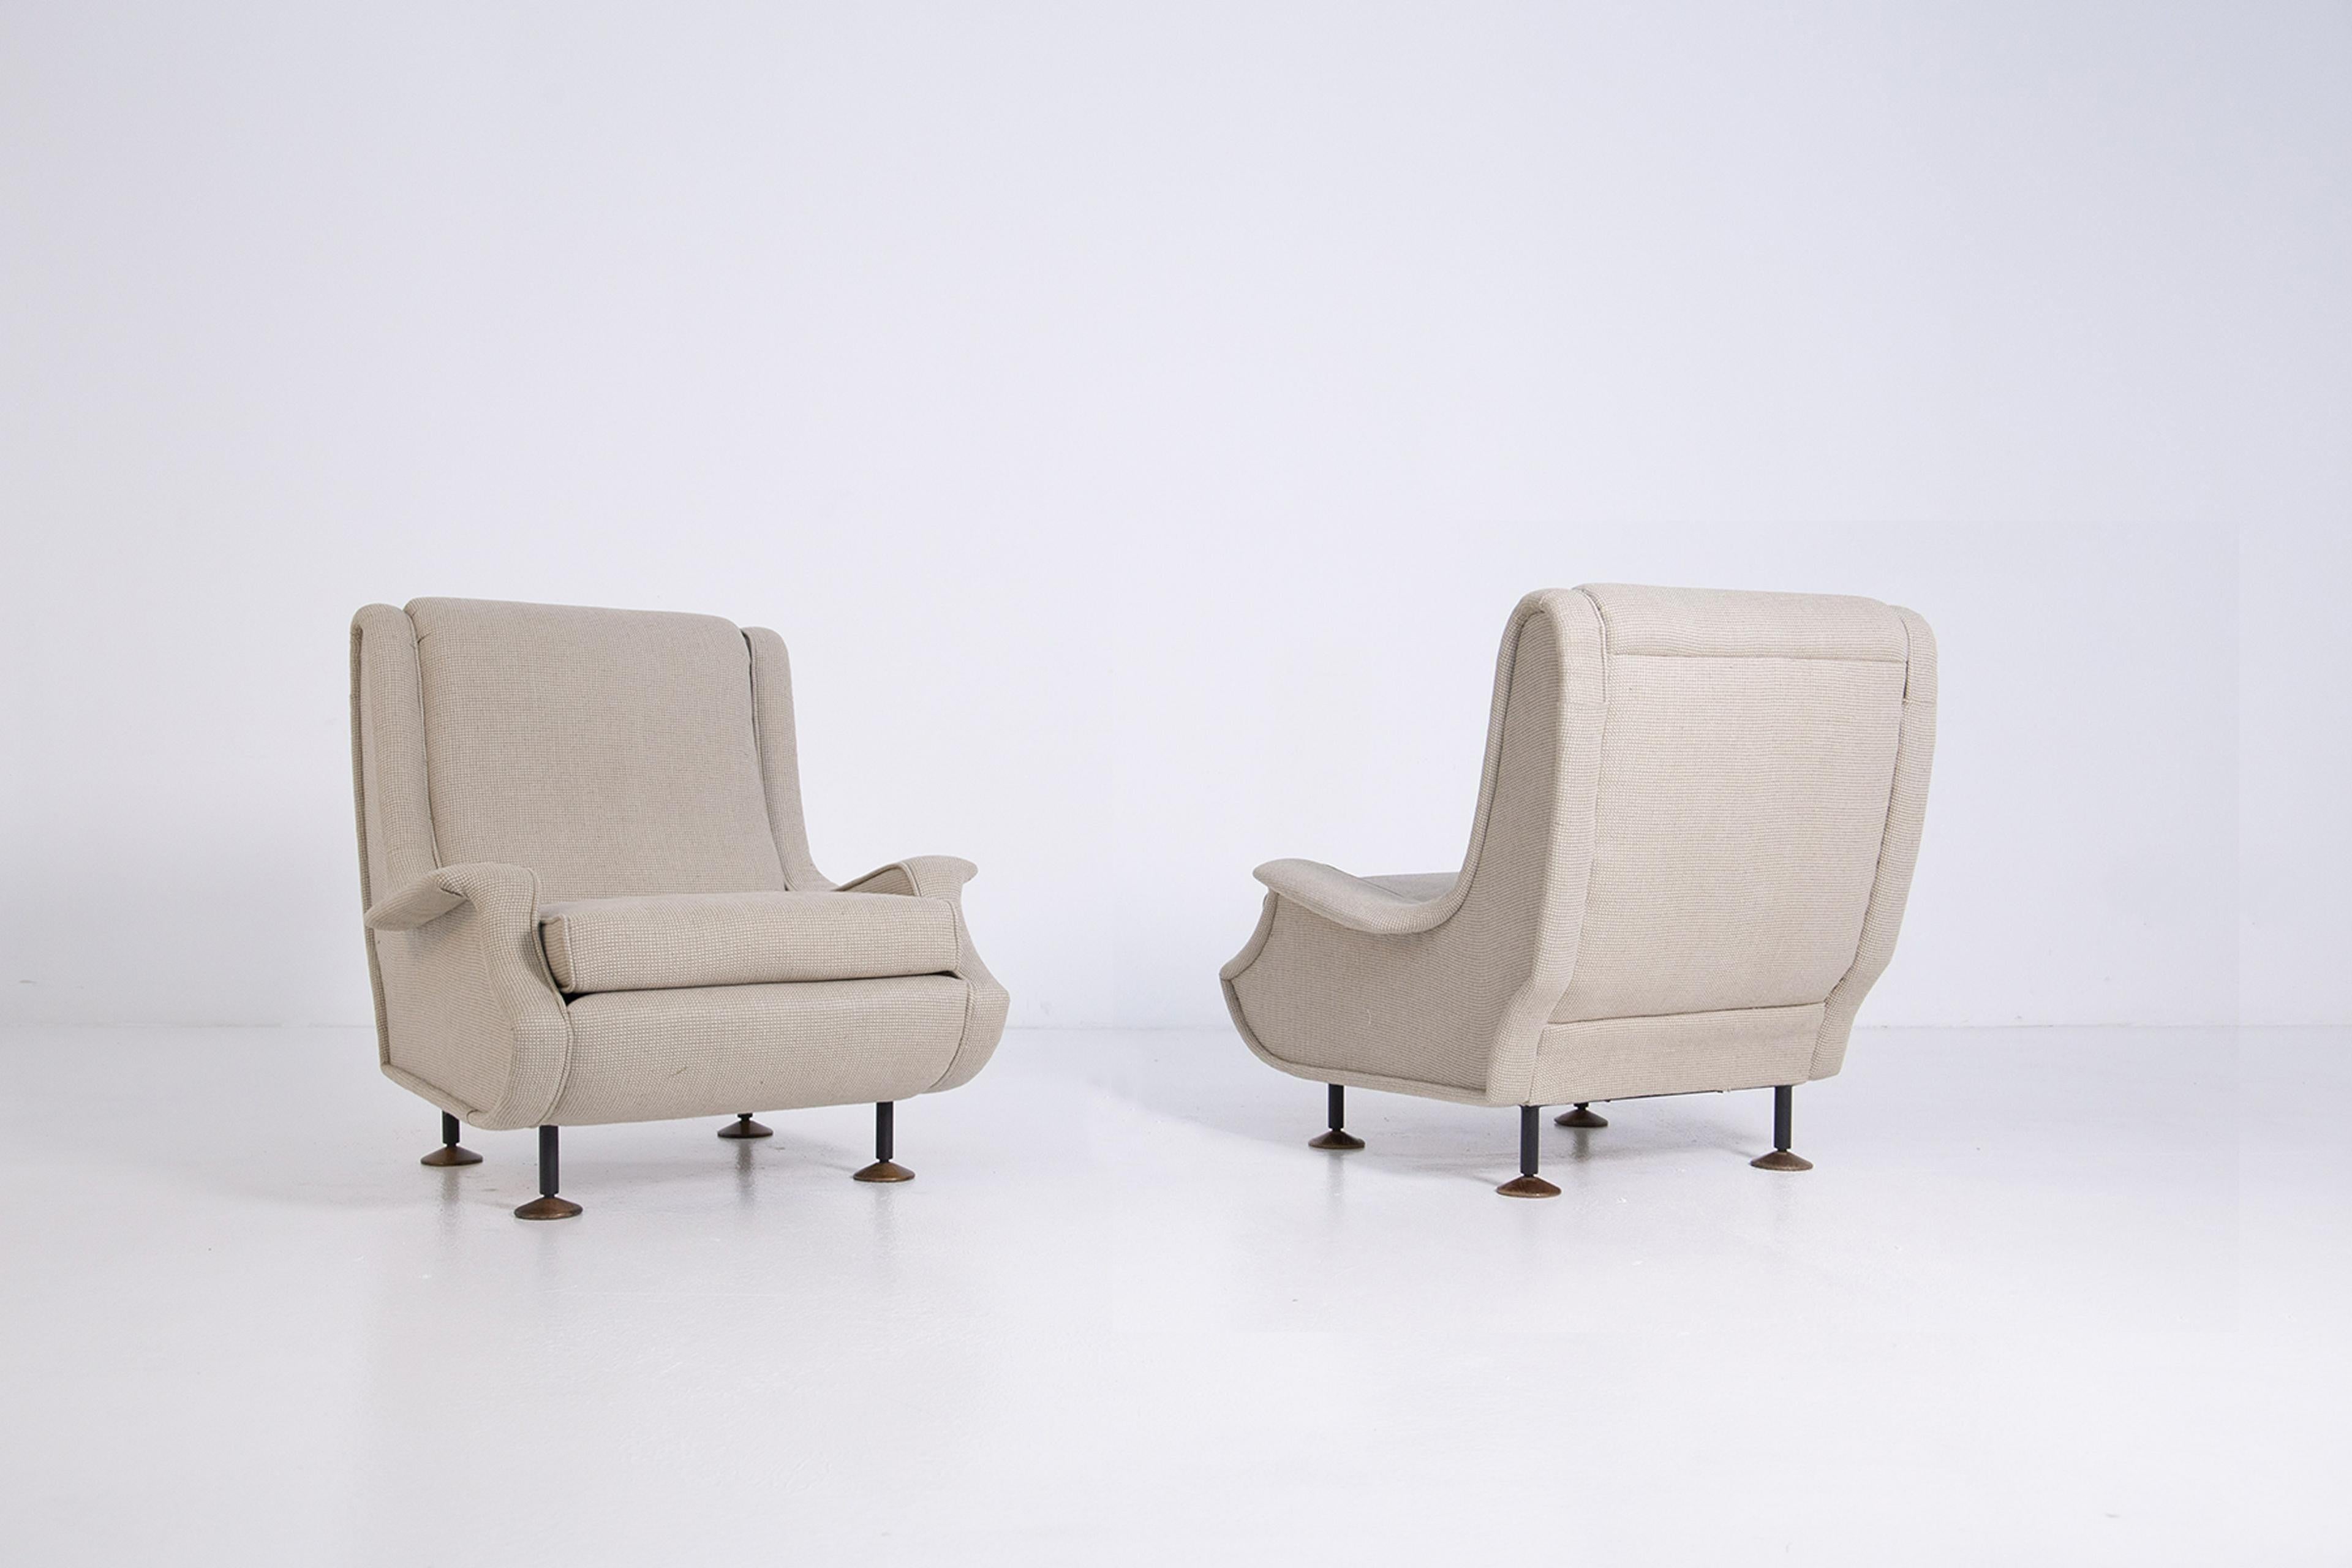 Regent armchairs by Marco Zanuso, Arflex, Italy, 1960's

Designed in 1960 by Marco Zanuso, the Regent is less well known than his classic 